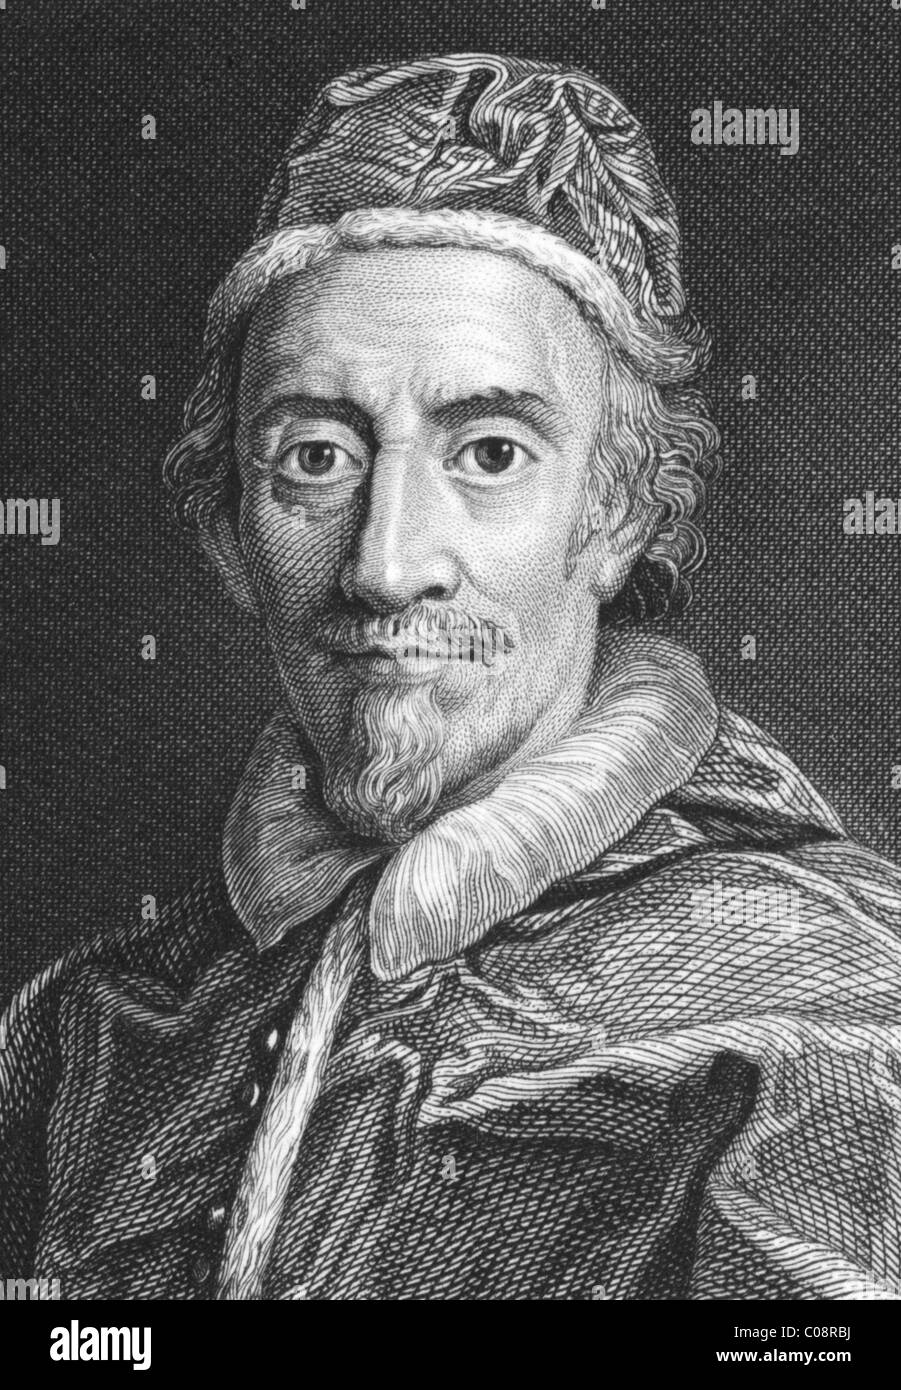 Pope Clement IX (1600-1669) on engraving from the 1800s. Born Giulio Rospigliosi, was Pope during 1667-1669. Stock Photo